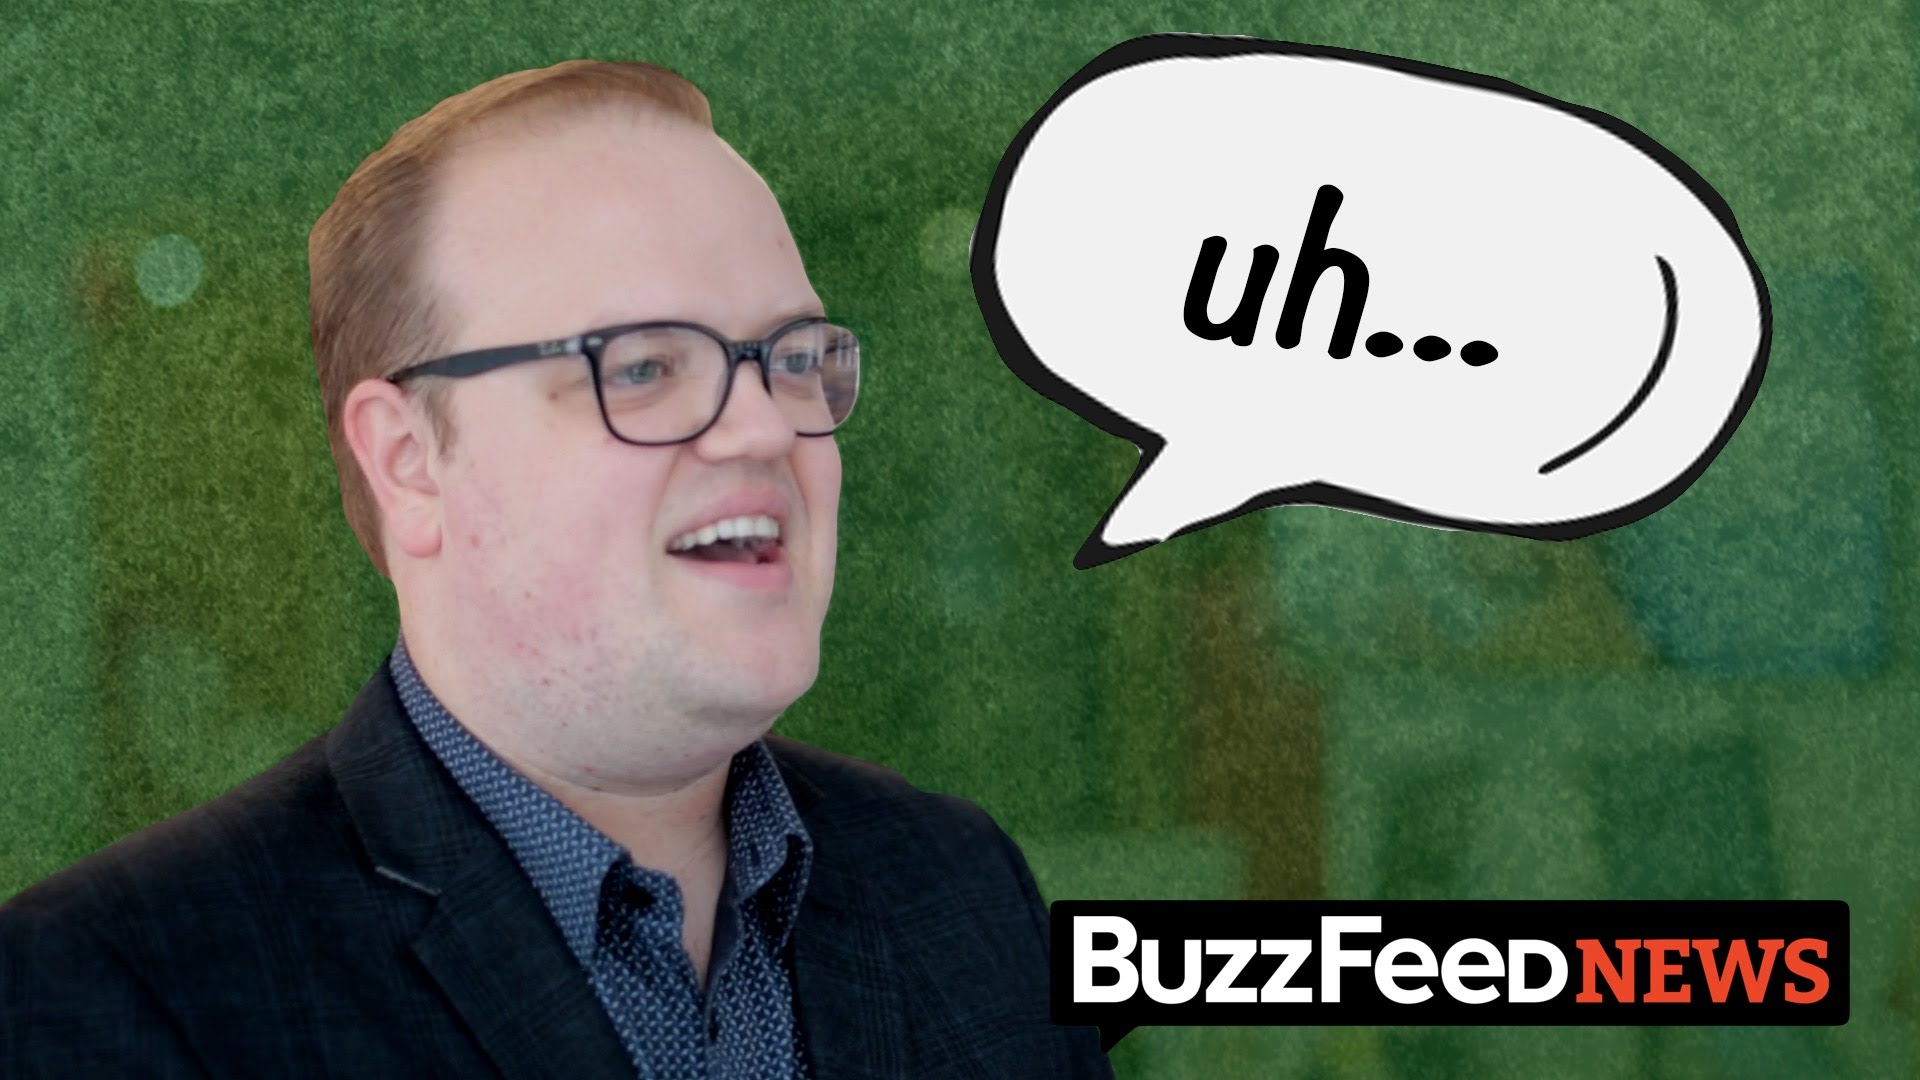 Why I left BuzzFeed: Former employees speak out against media company and fake news outlet